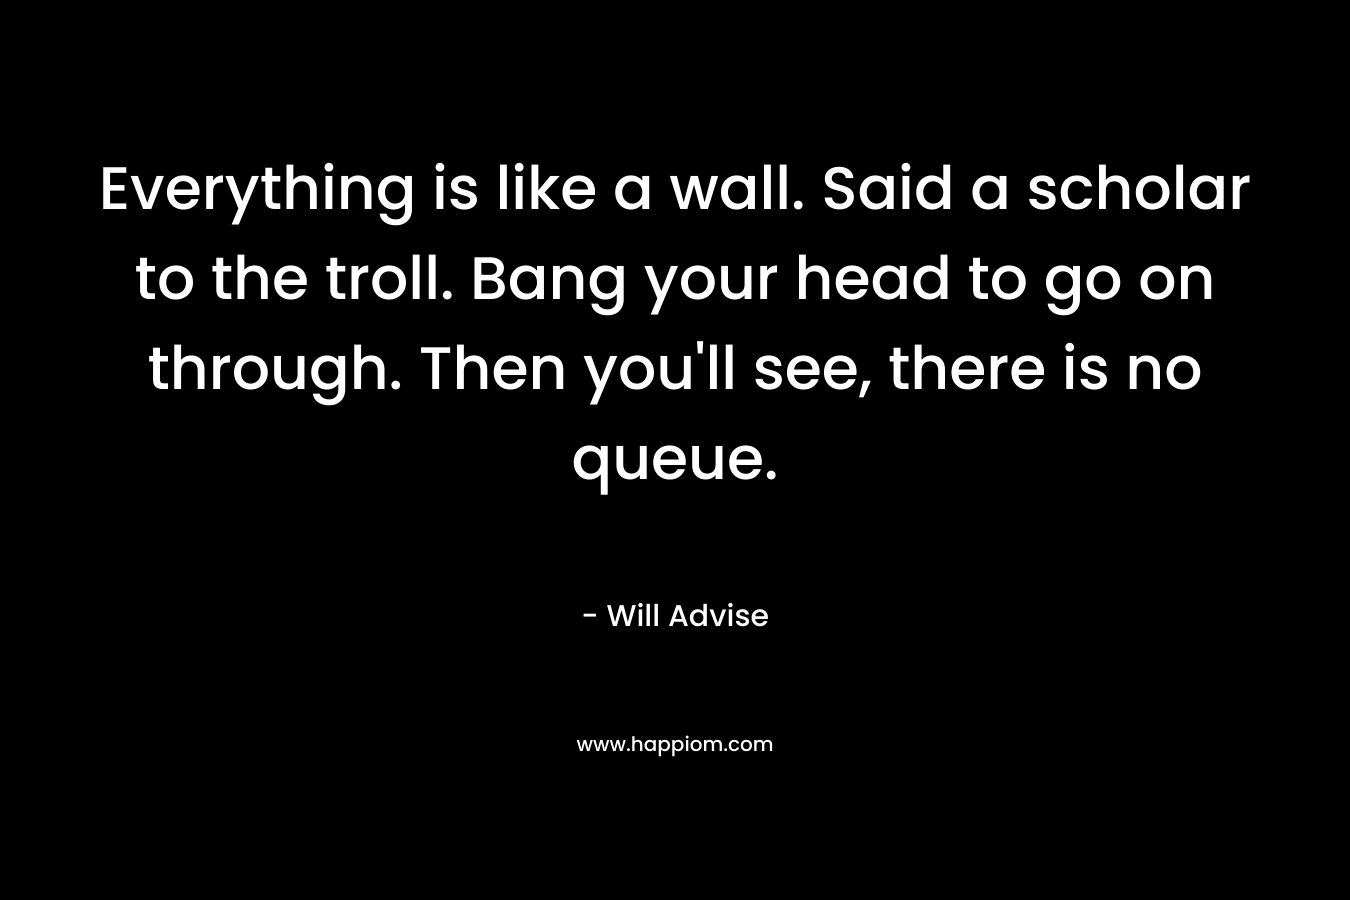 Everything is like a wall. Said a scholar to the troll. Bang your head to go on through. Then you’ll see, there is no queue. – Will Advise